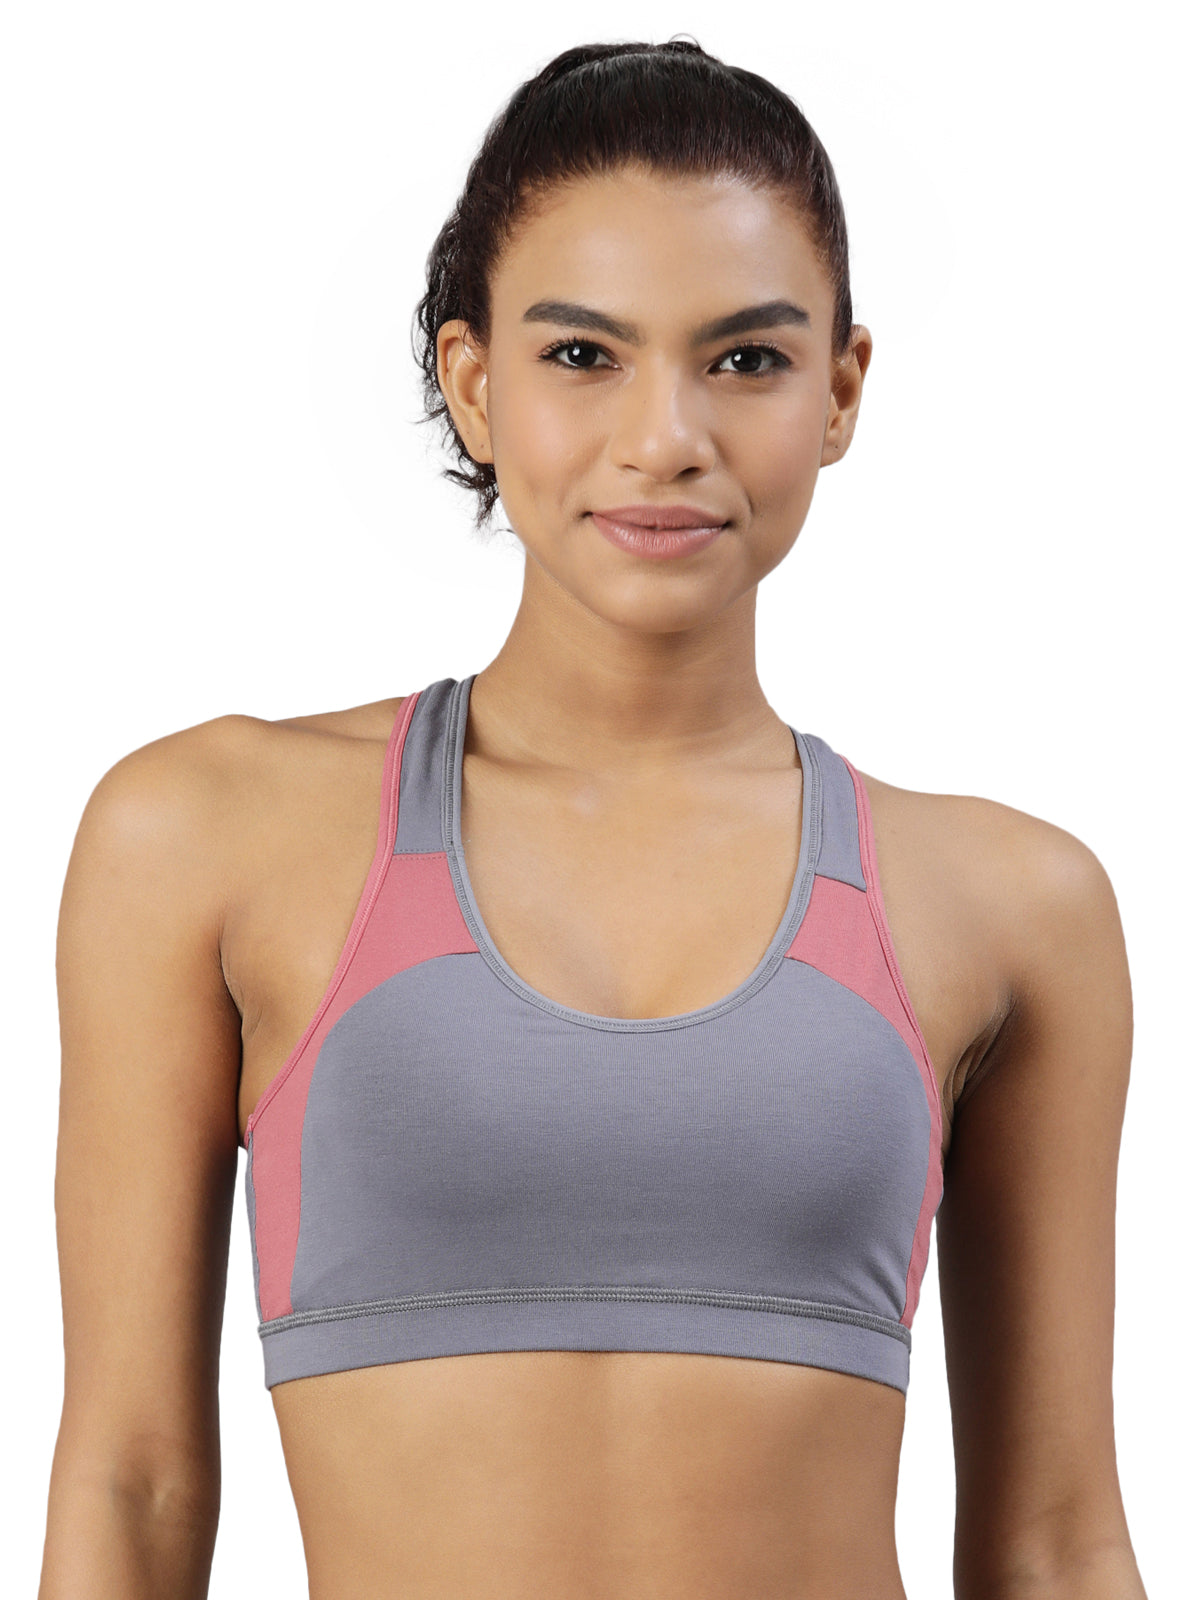 blossom-workout bra-silver grey red1-Sports collection-utility based bra